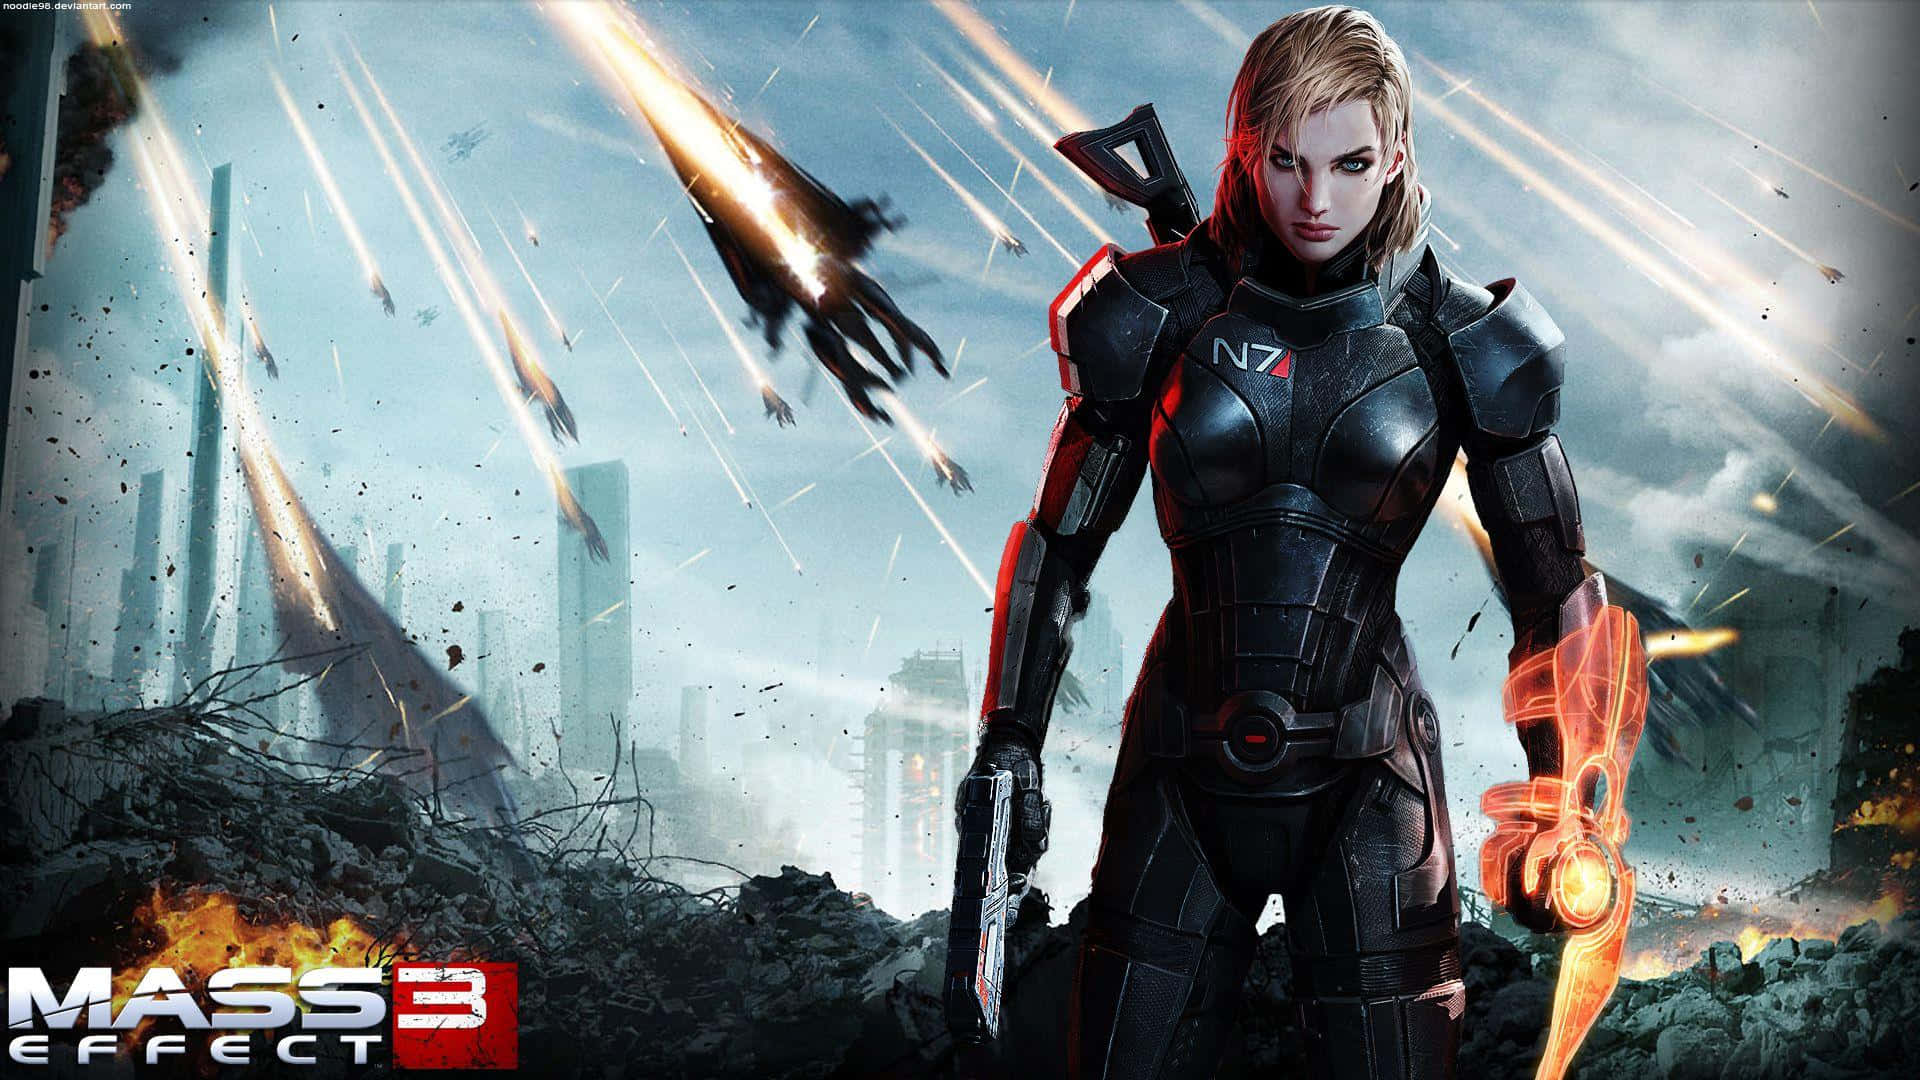 Femshep From Mass Effect Standing Proudly on a Spacecraft Wallpaper